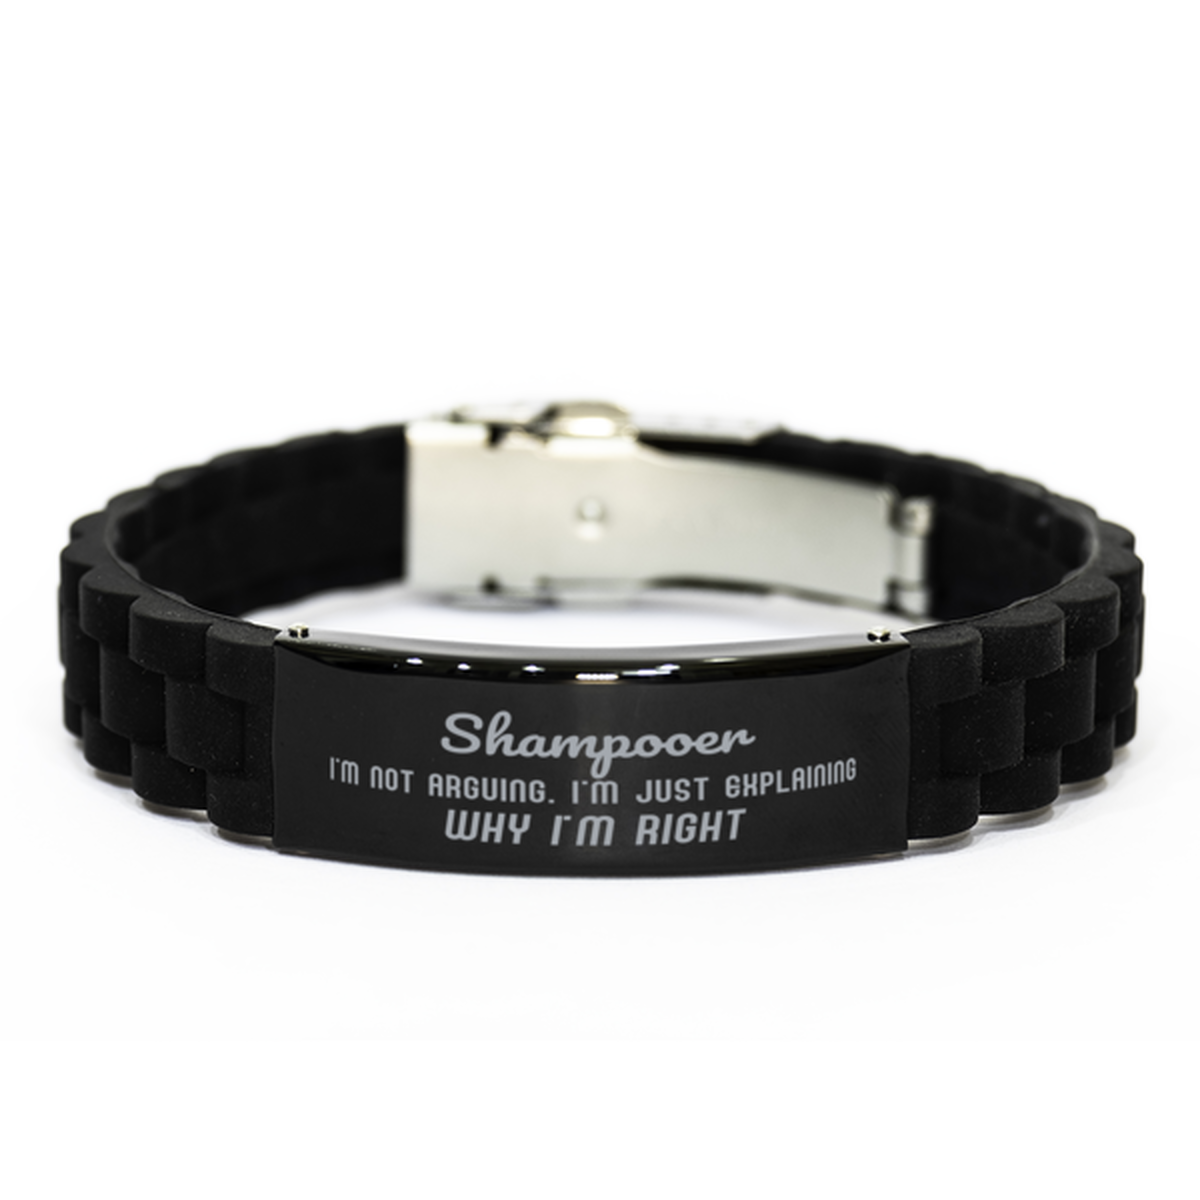 Shampooer I'm not Arguing. I'm Just Explaining Why I'm RIGHT Black Glidelock Clasp Bracelet, Funny Saying Quote Shampooer Gifts For Shampooer Graduation Birthday Christmas Gifts for Men Women Coworker